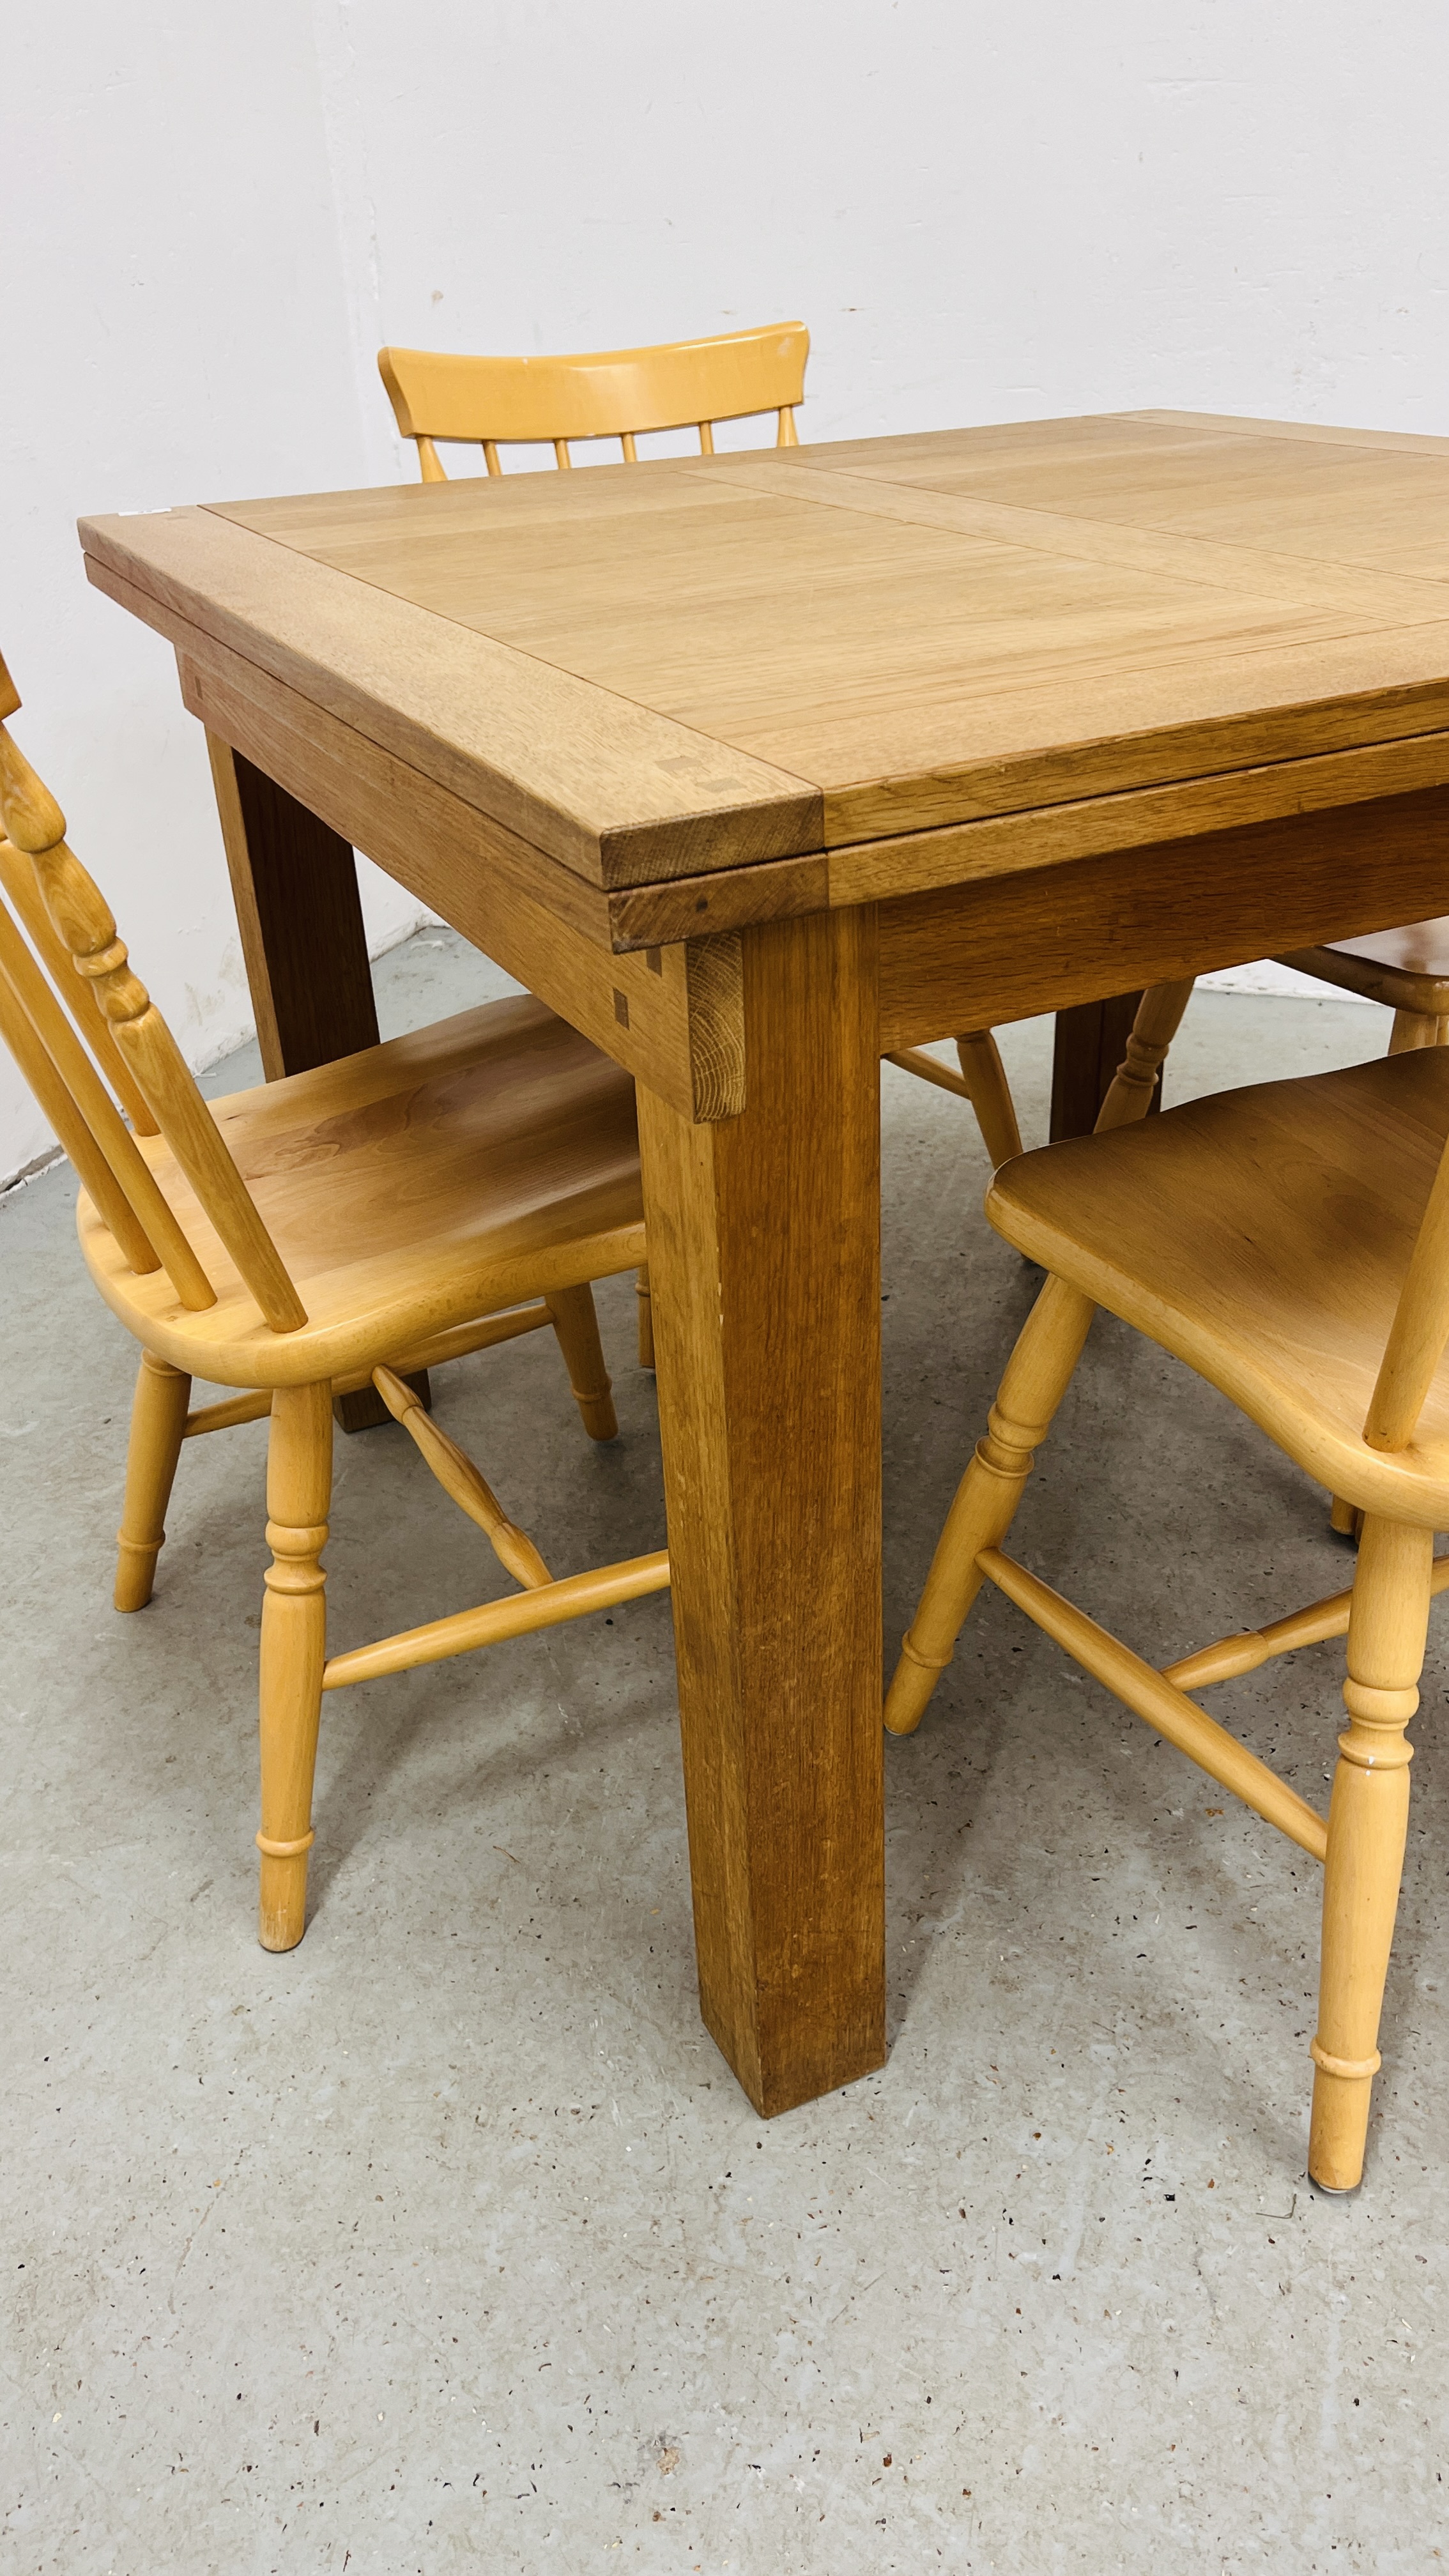 A SOLID OAK EXTENDING DINING TABLE ALONG WITH A SET OF FOUR BEECH WOOD DINING CHAIRS - Image 5 of 14